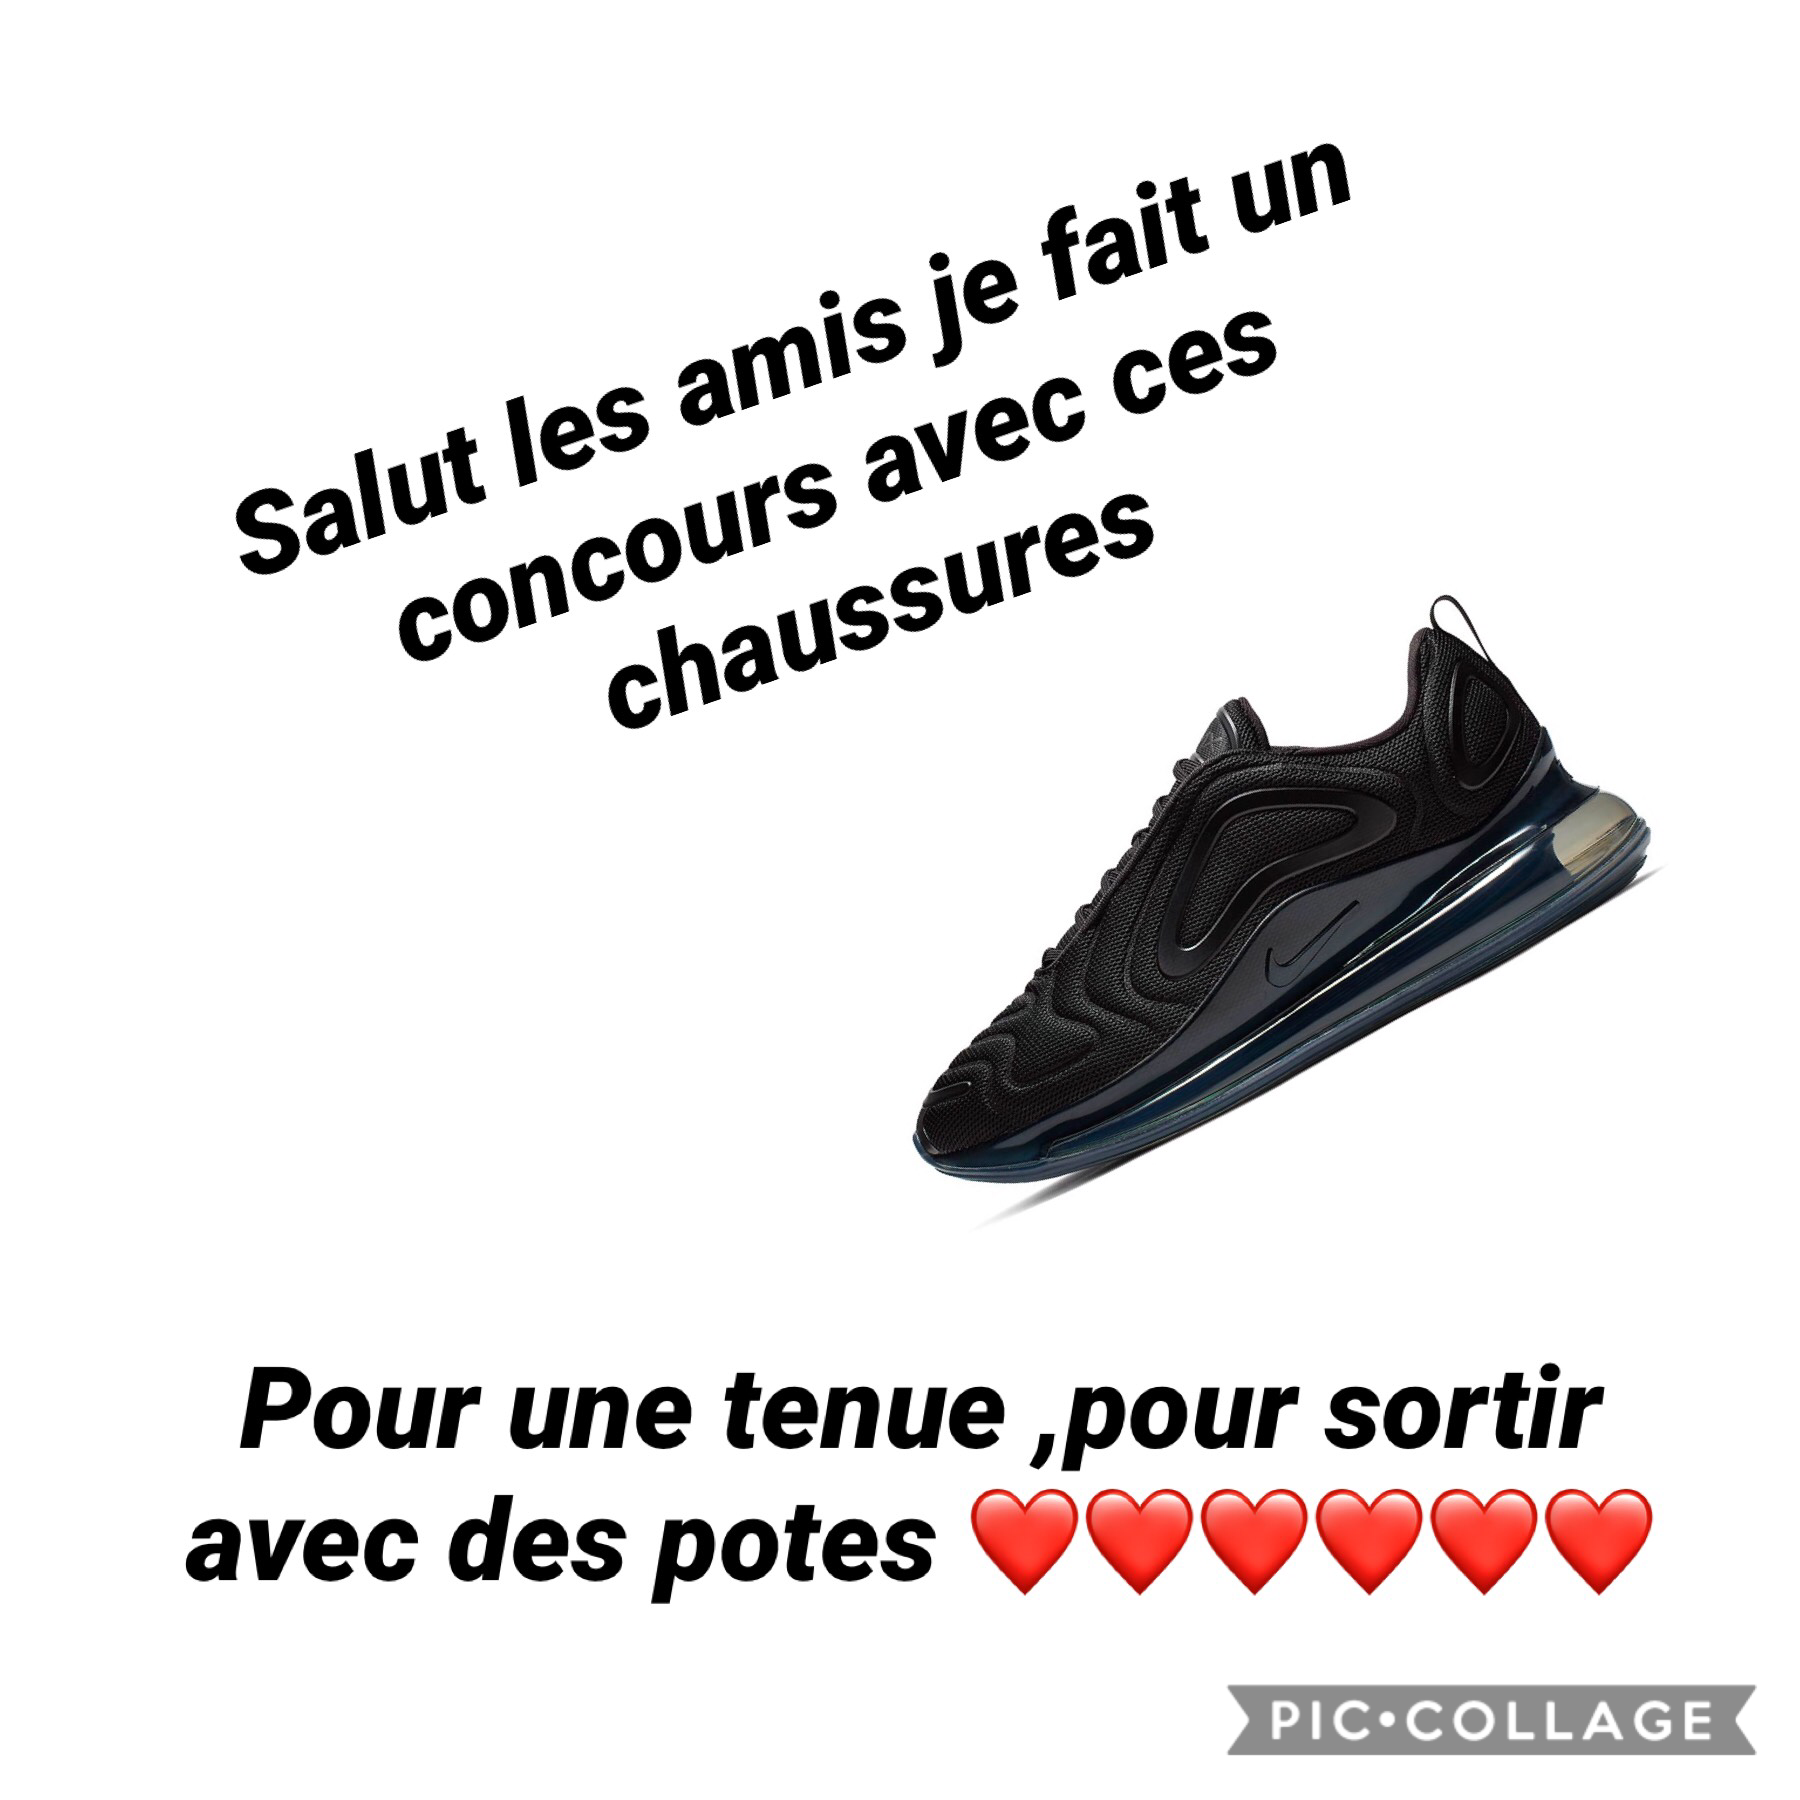 Concours 😘😘😘